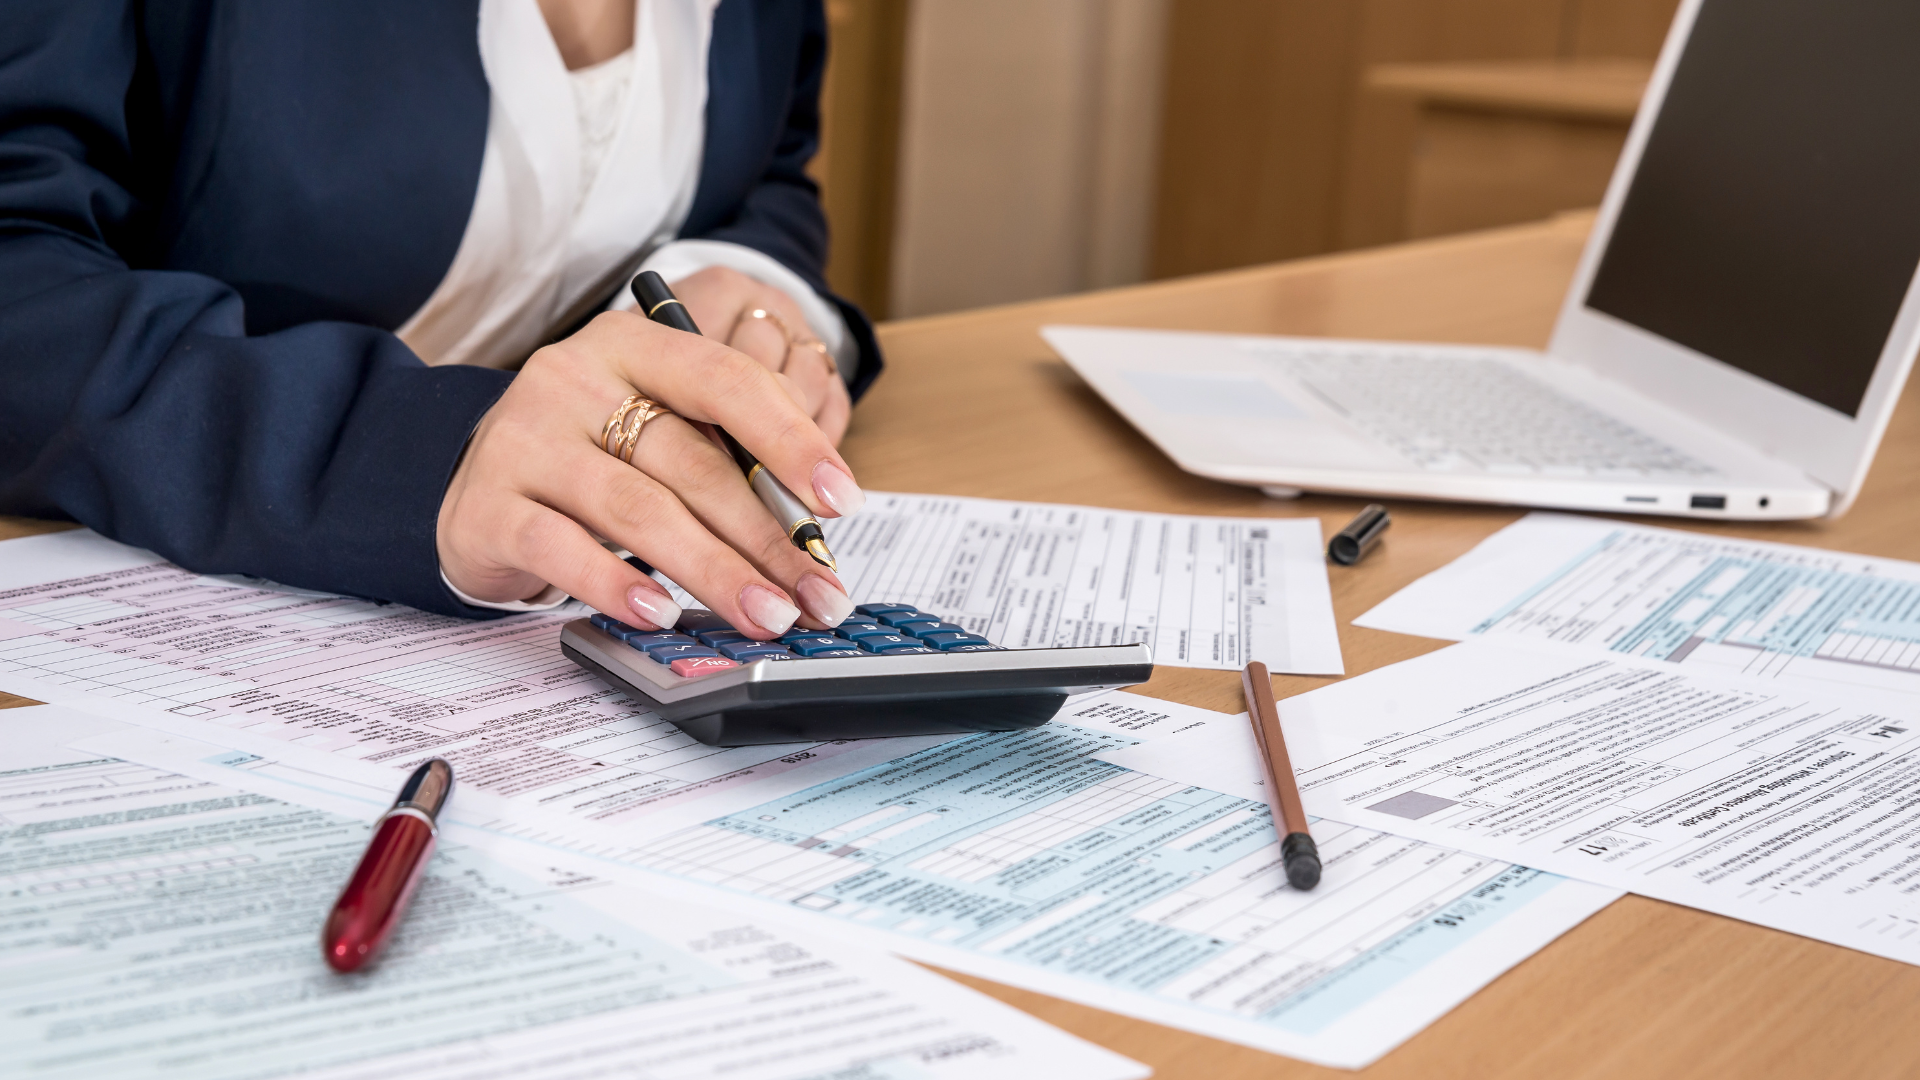 Small Business Tax Deduction Checklist - Part 1